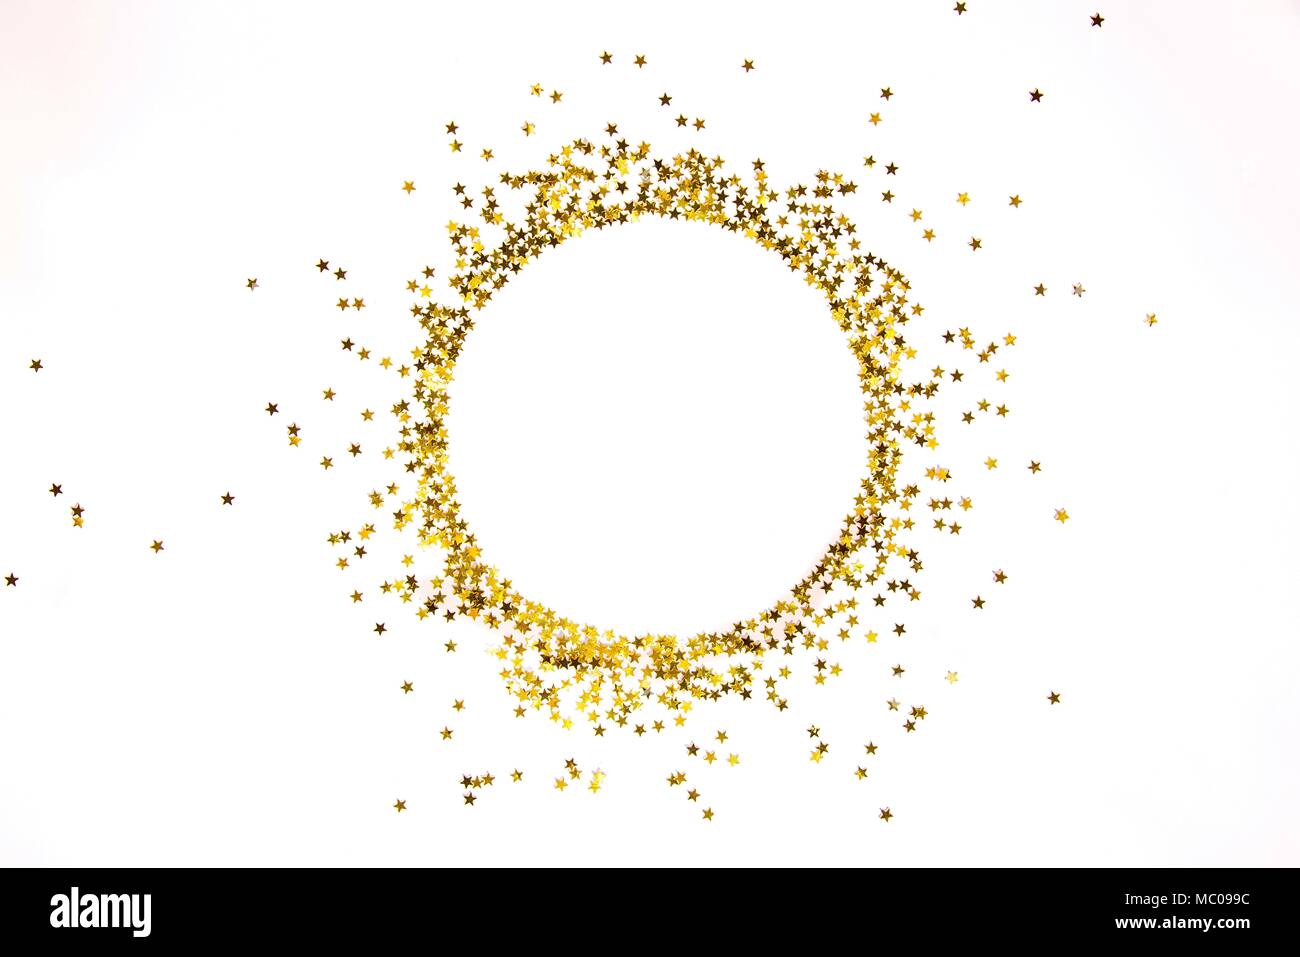 Star shaped golden sequins frame arranged in circle. Stock Photo